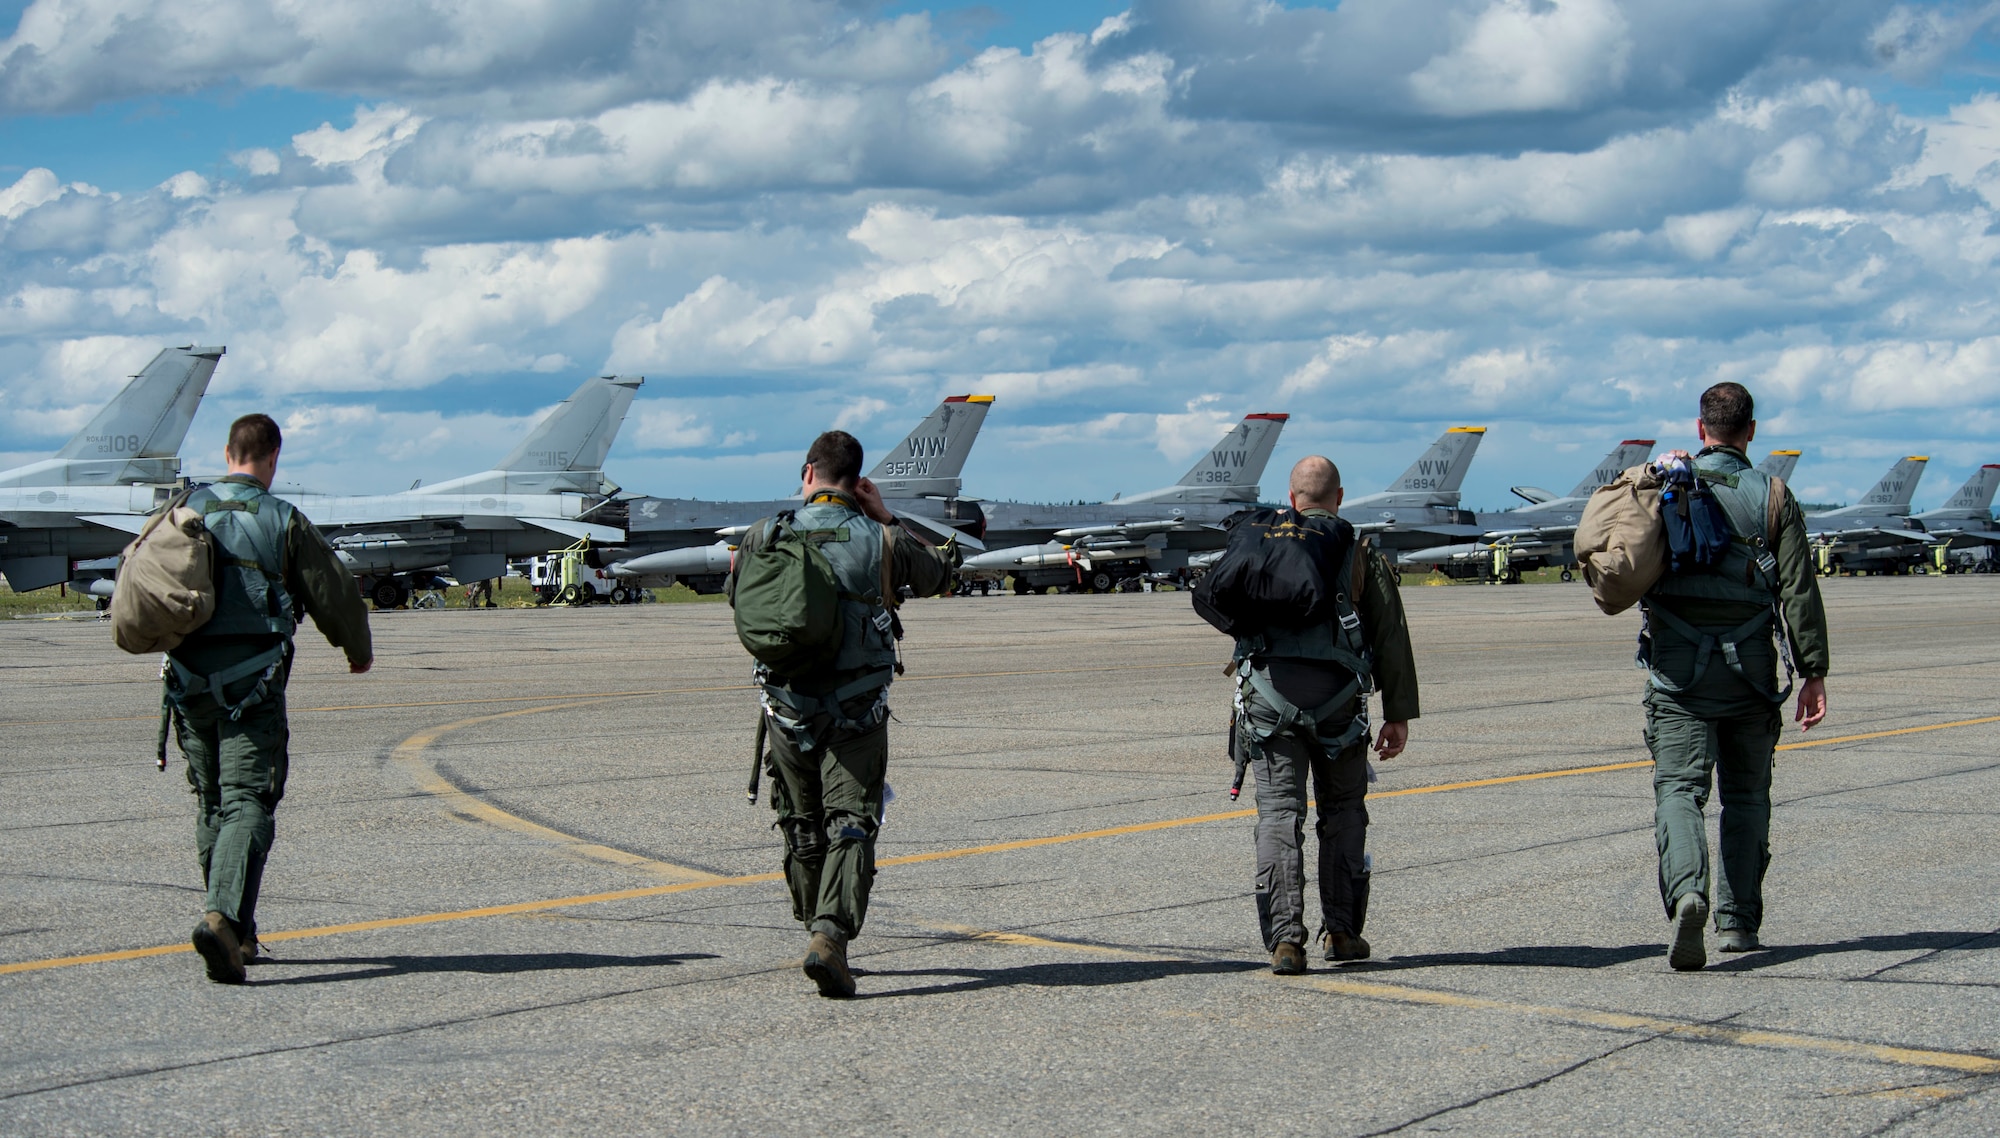 U.S. Air Force fighter pilots assigned to the 14th Fighter Squadron walk onto the flight line during RED FLAG-Alaska 17-2 June 16, 2017, at Eielson Air Force Base, Alaska. RED FLAG-Alaska provides an optimal training environment in the Indo-Asia Pacific Region and focuses on improving ground, space, and cyberspace combat readiness and interoperability for U.S. and international forces.  (U.S. Air Force photo by Airman 1st Class Haley D. Phillips)